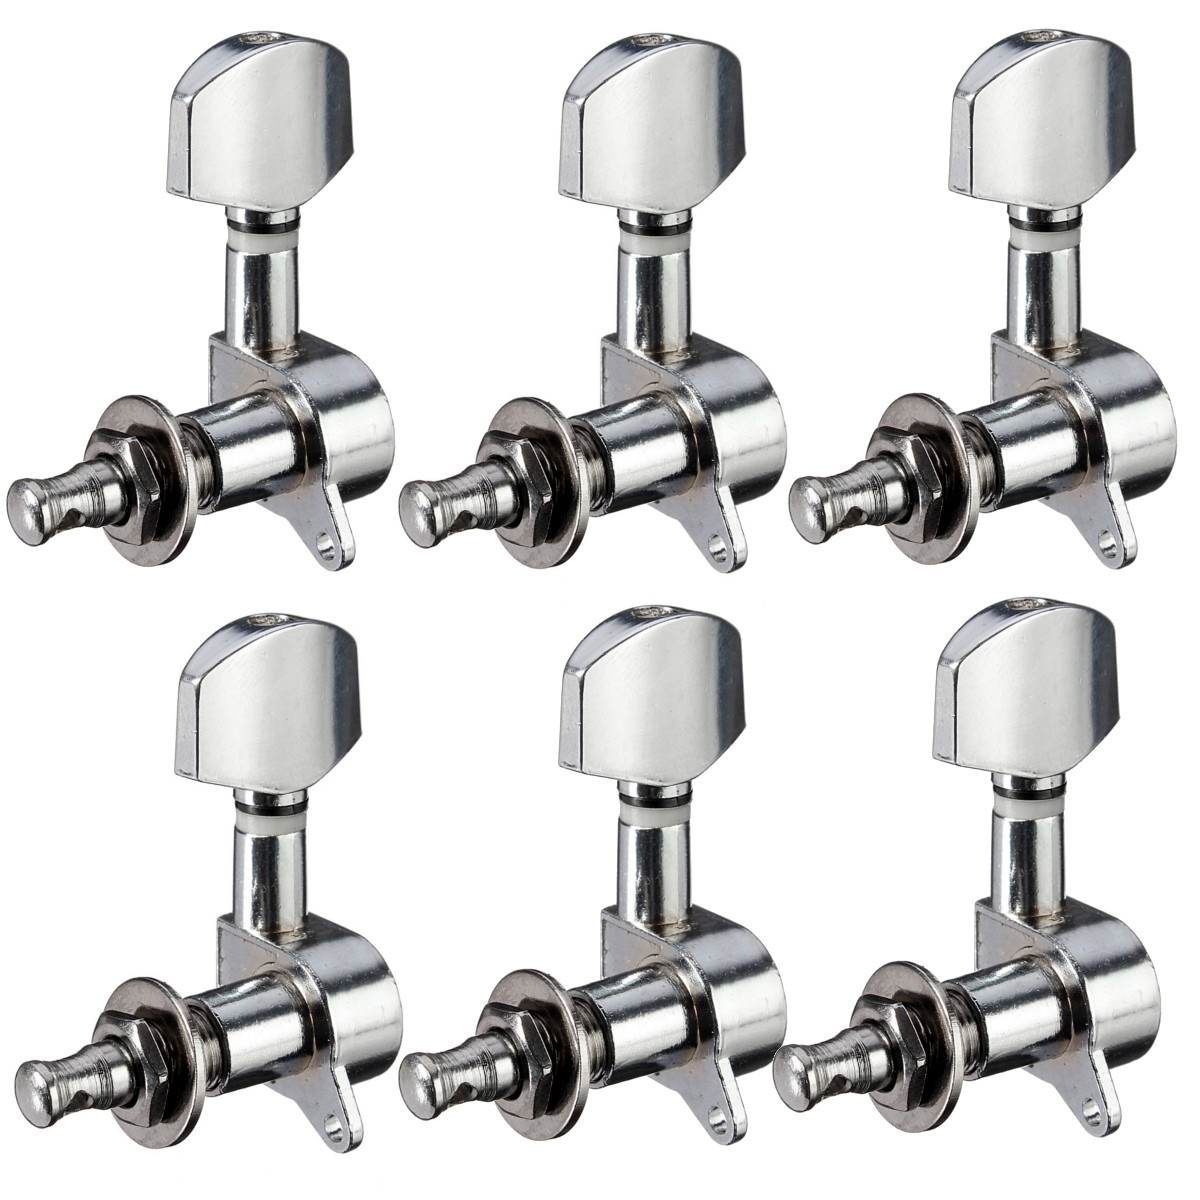 6Pcs Guitar String Tuning Pegs Tuners Machine Heads Acoustic Electric Guitar Part